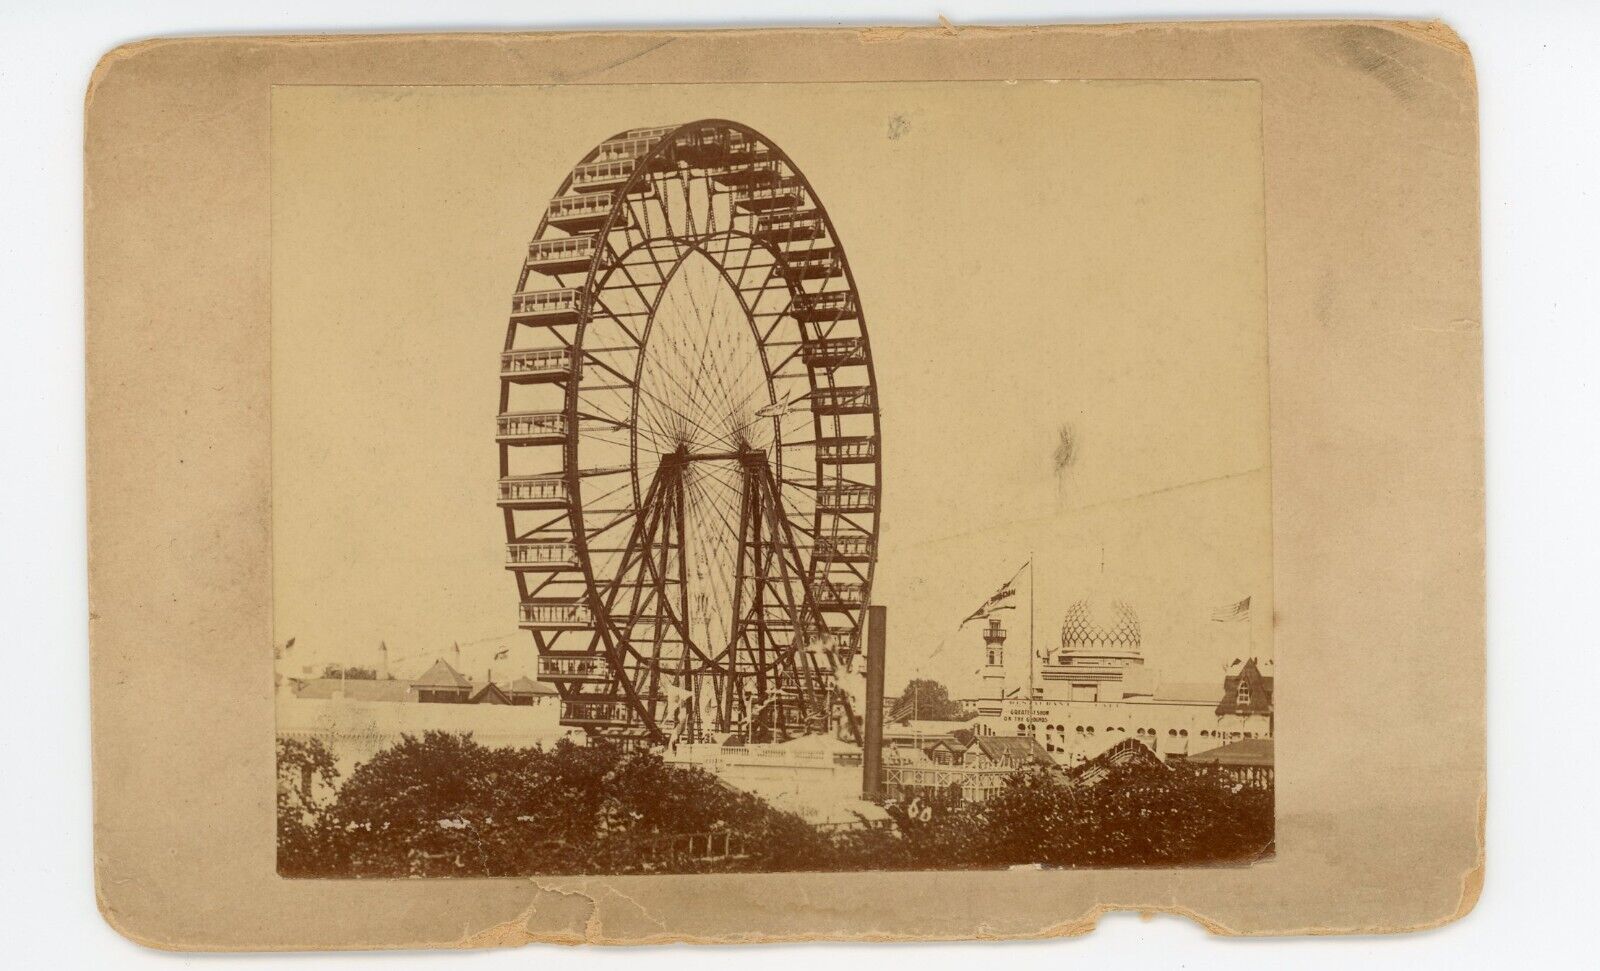 1893 Real Photograph of the First Ferris Wheel, Chicago World Exposition 3.5x4.5